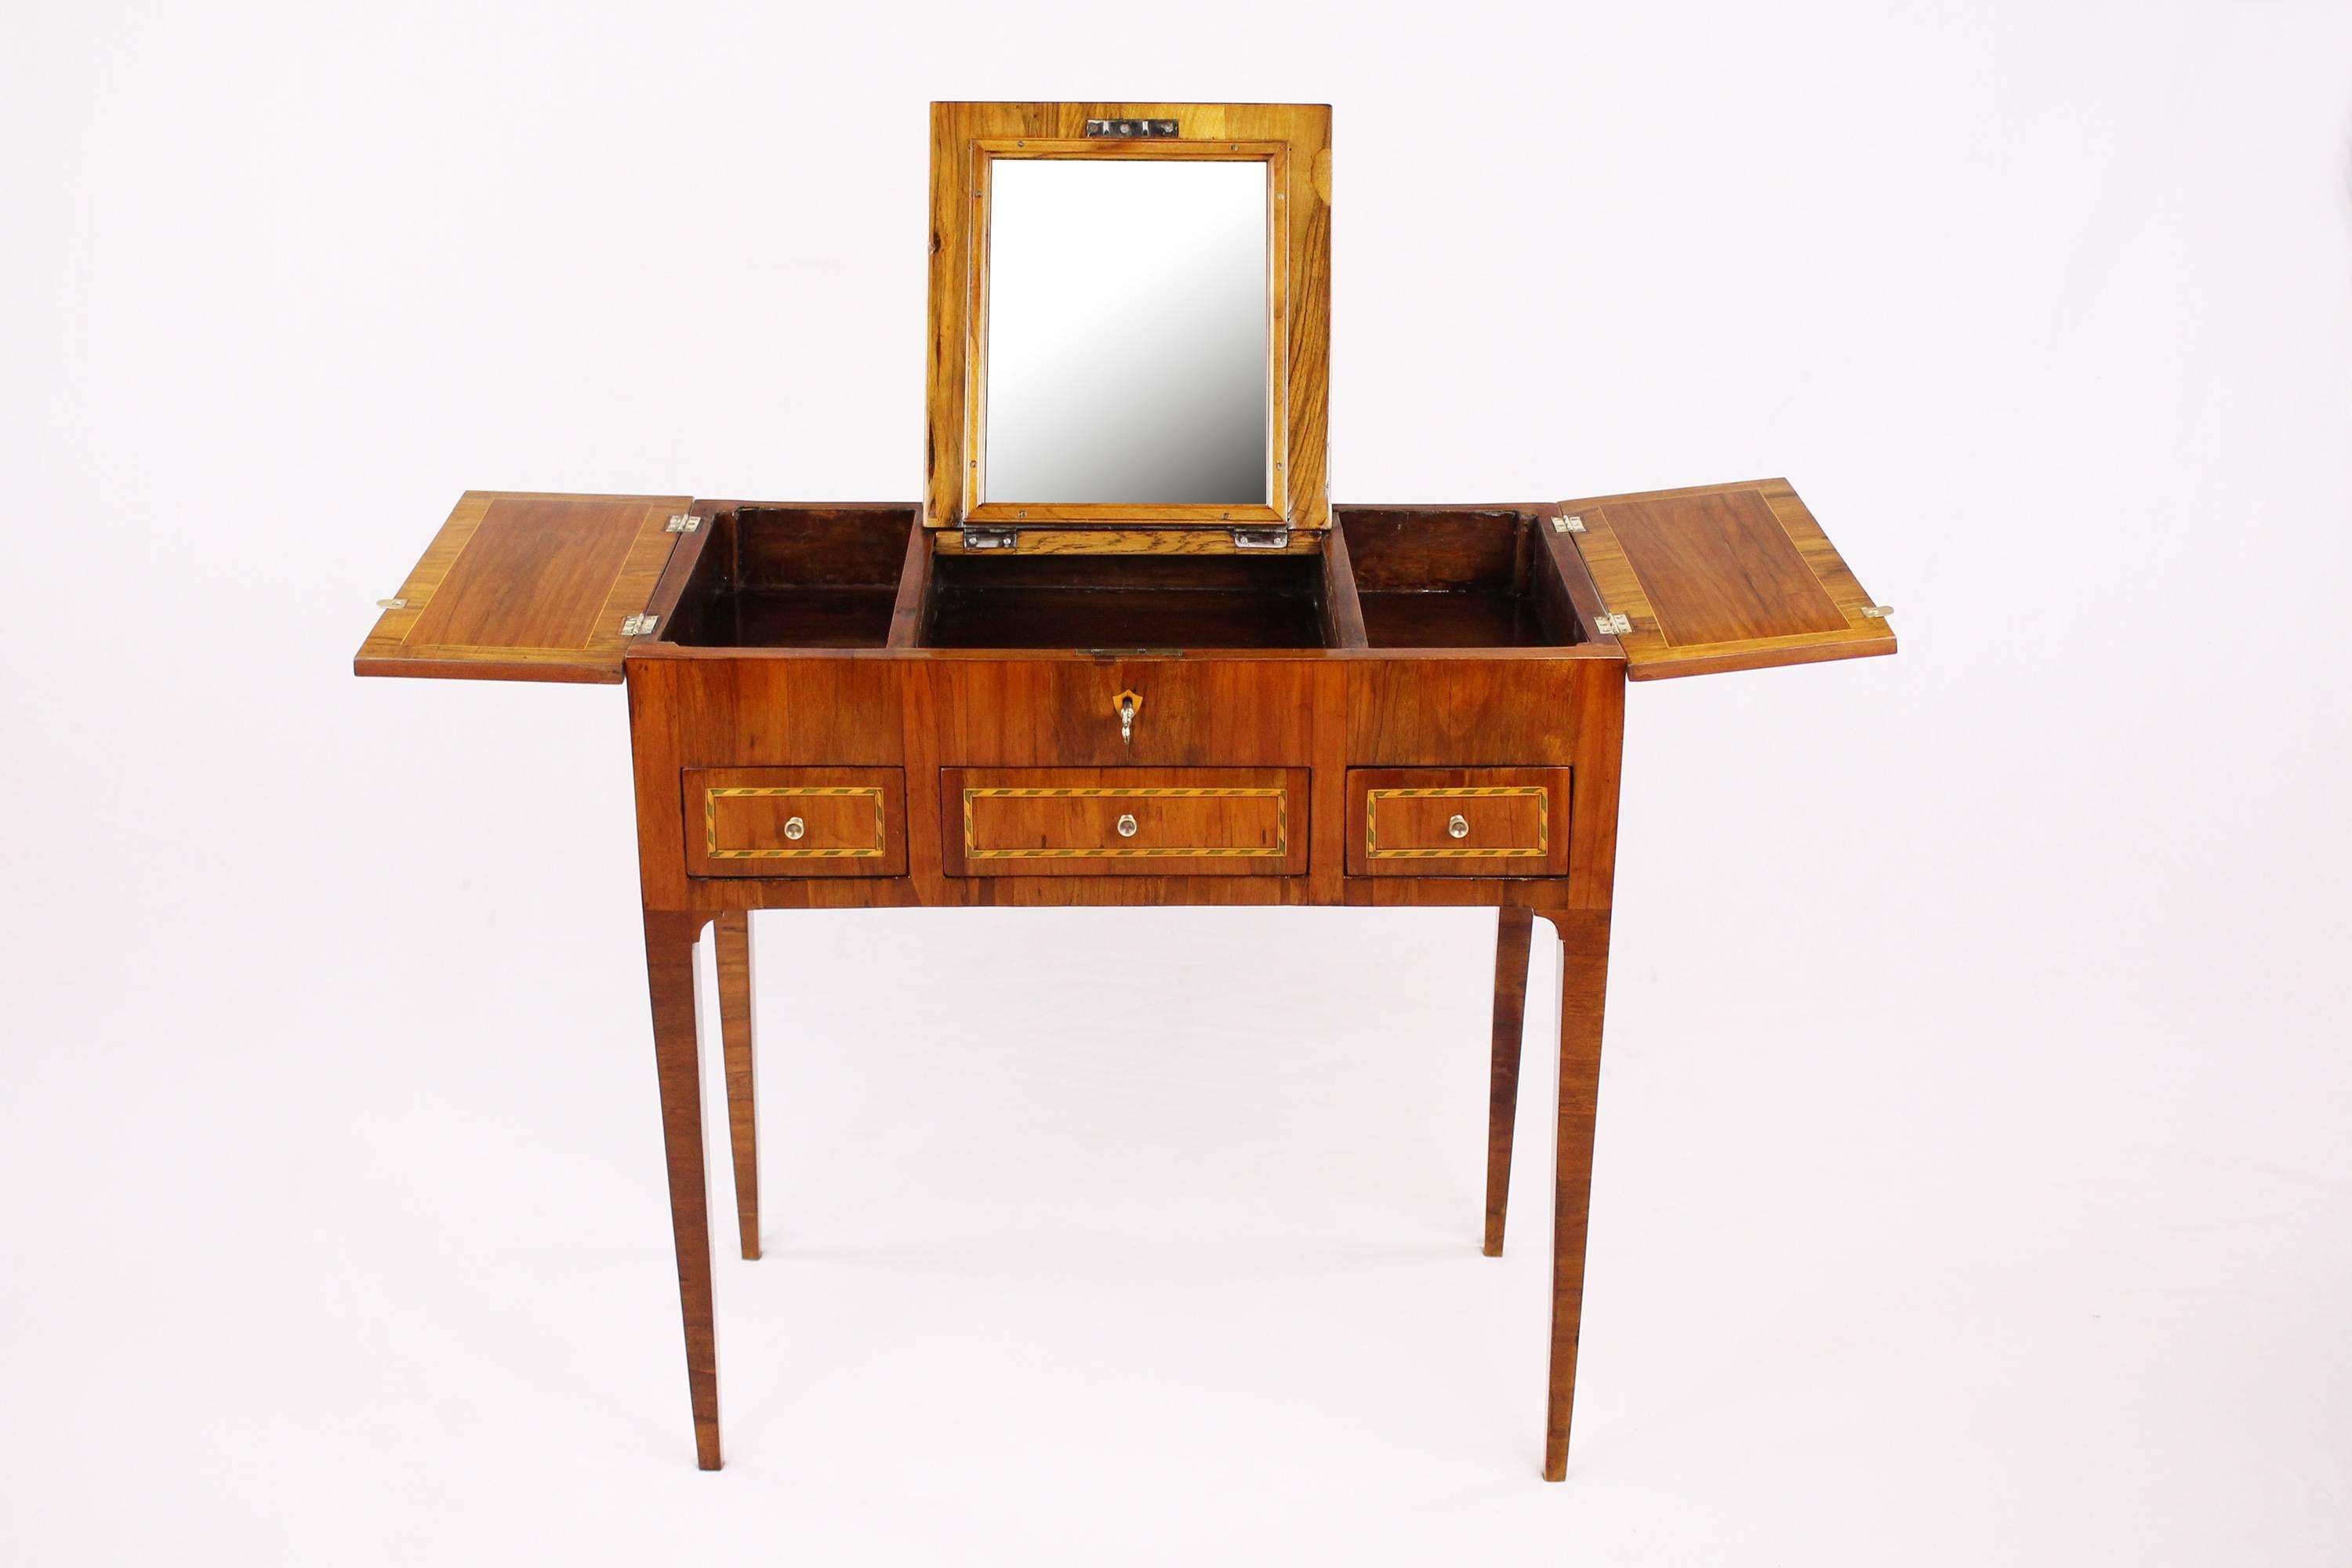 • Early and very rare 19th century dressing table in beautiful condition
• Poudreuse
• Mahogany veneered
• France, circa 1810-1820
• Beautiful marquetry works
• Three small pushes, on top openable, middle field with puttable up mirror
•